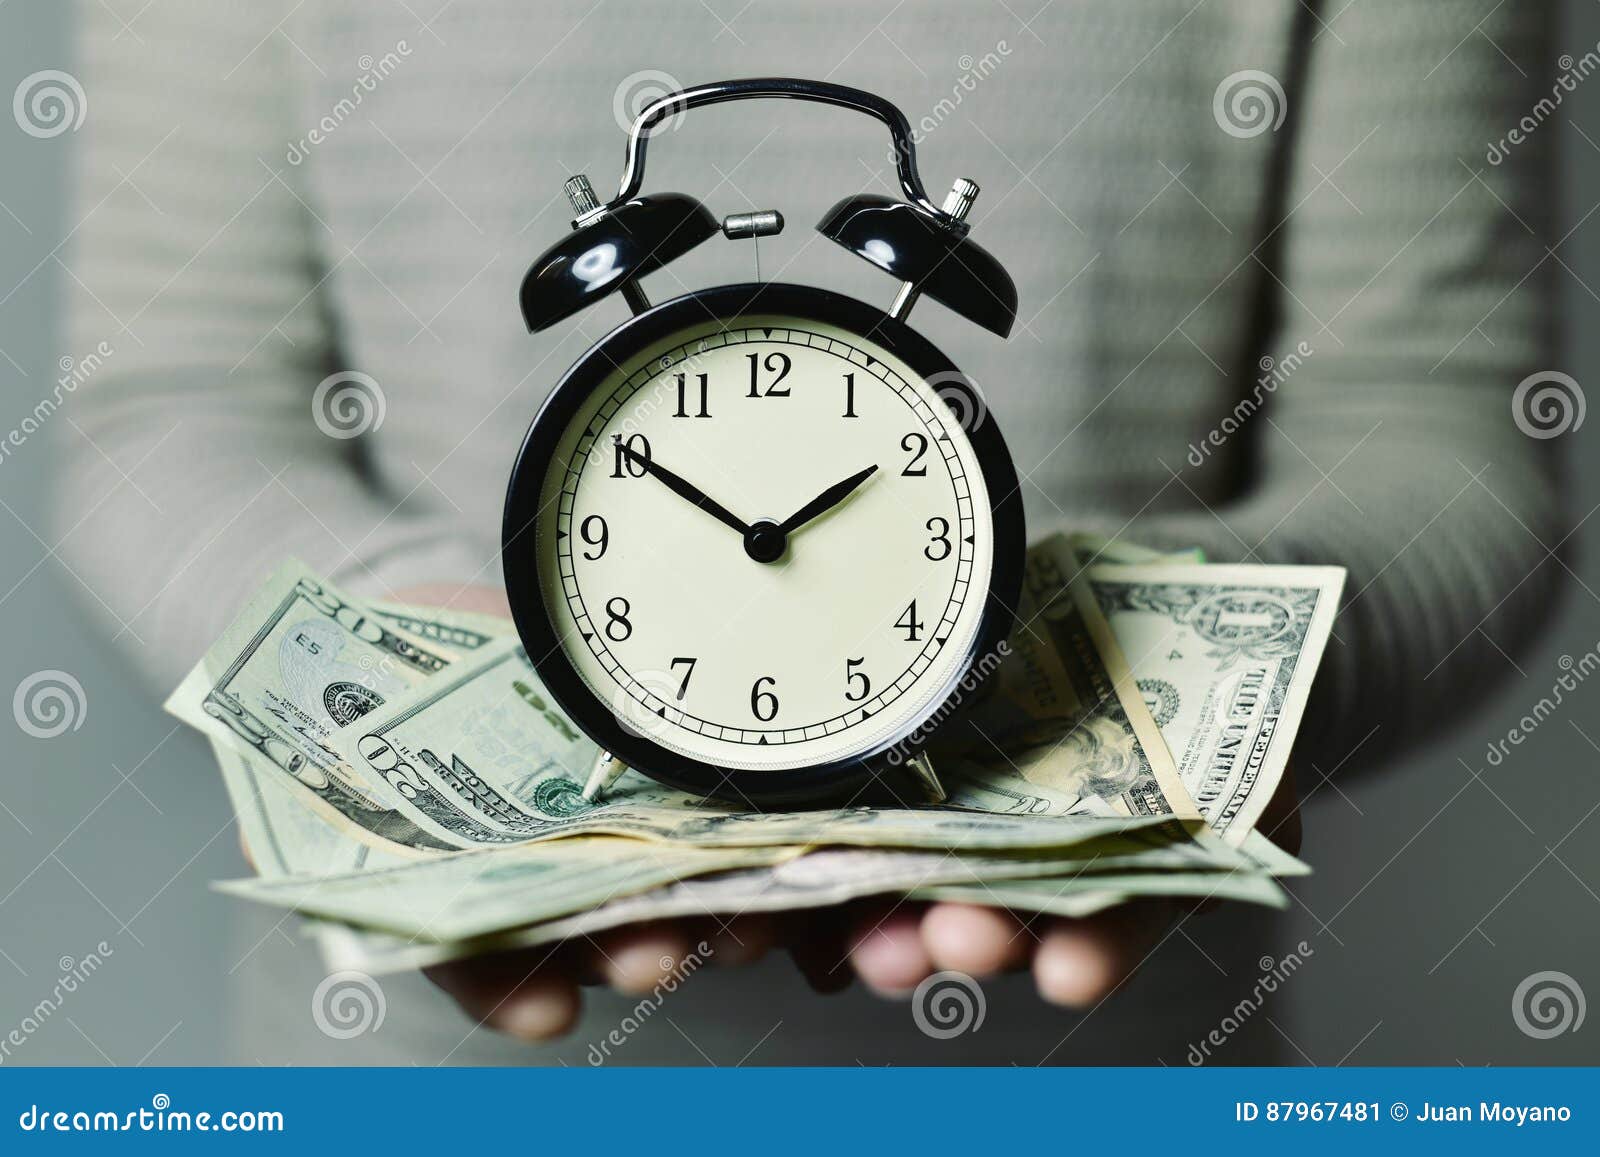 time is money